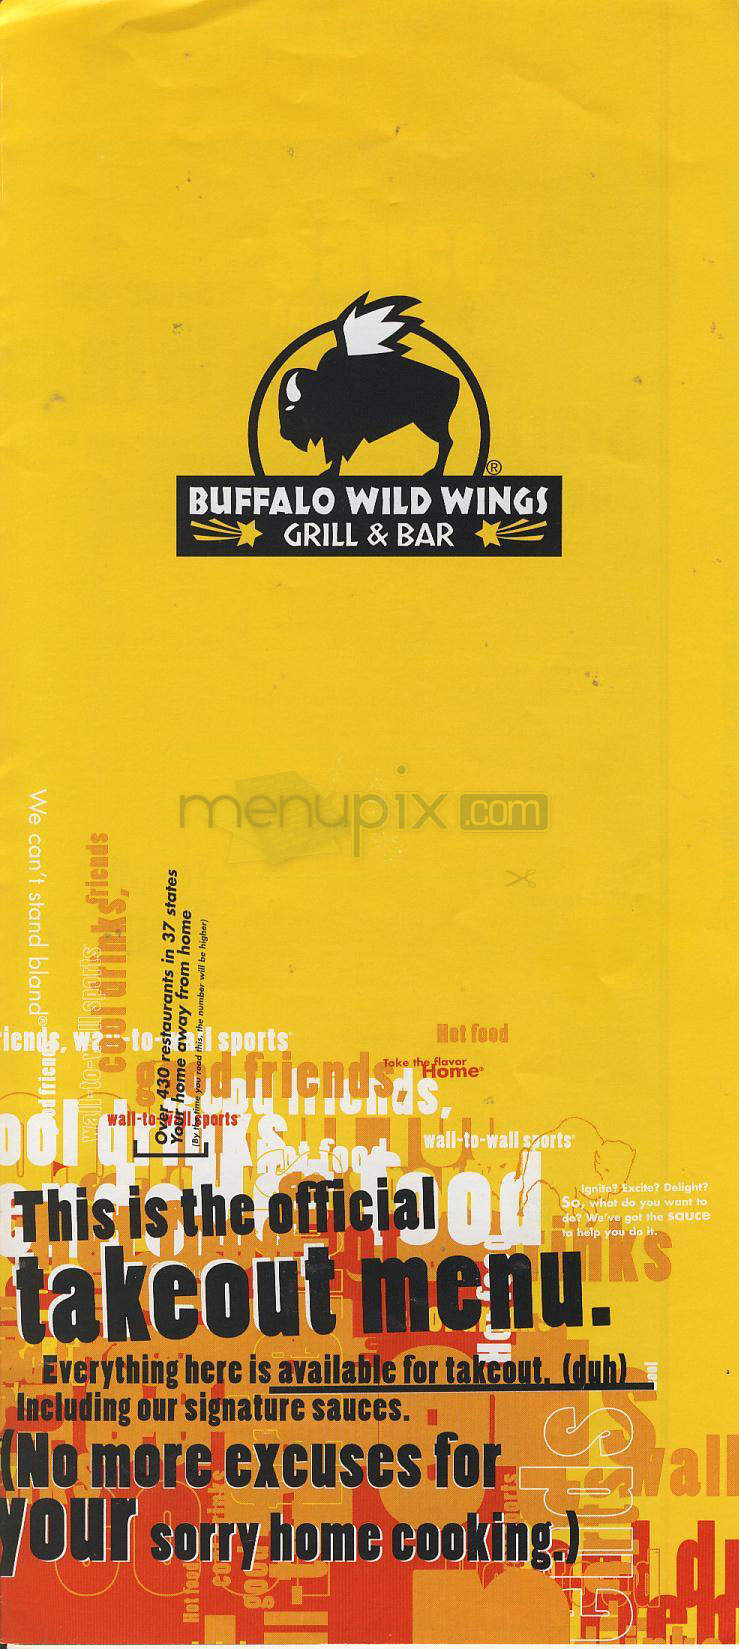 /380237189/Buffalo-Wild-Wings-Grill-and-Bar-Fairview-Park-OH - Fairview Park, OH